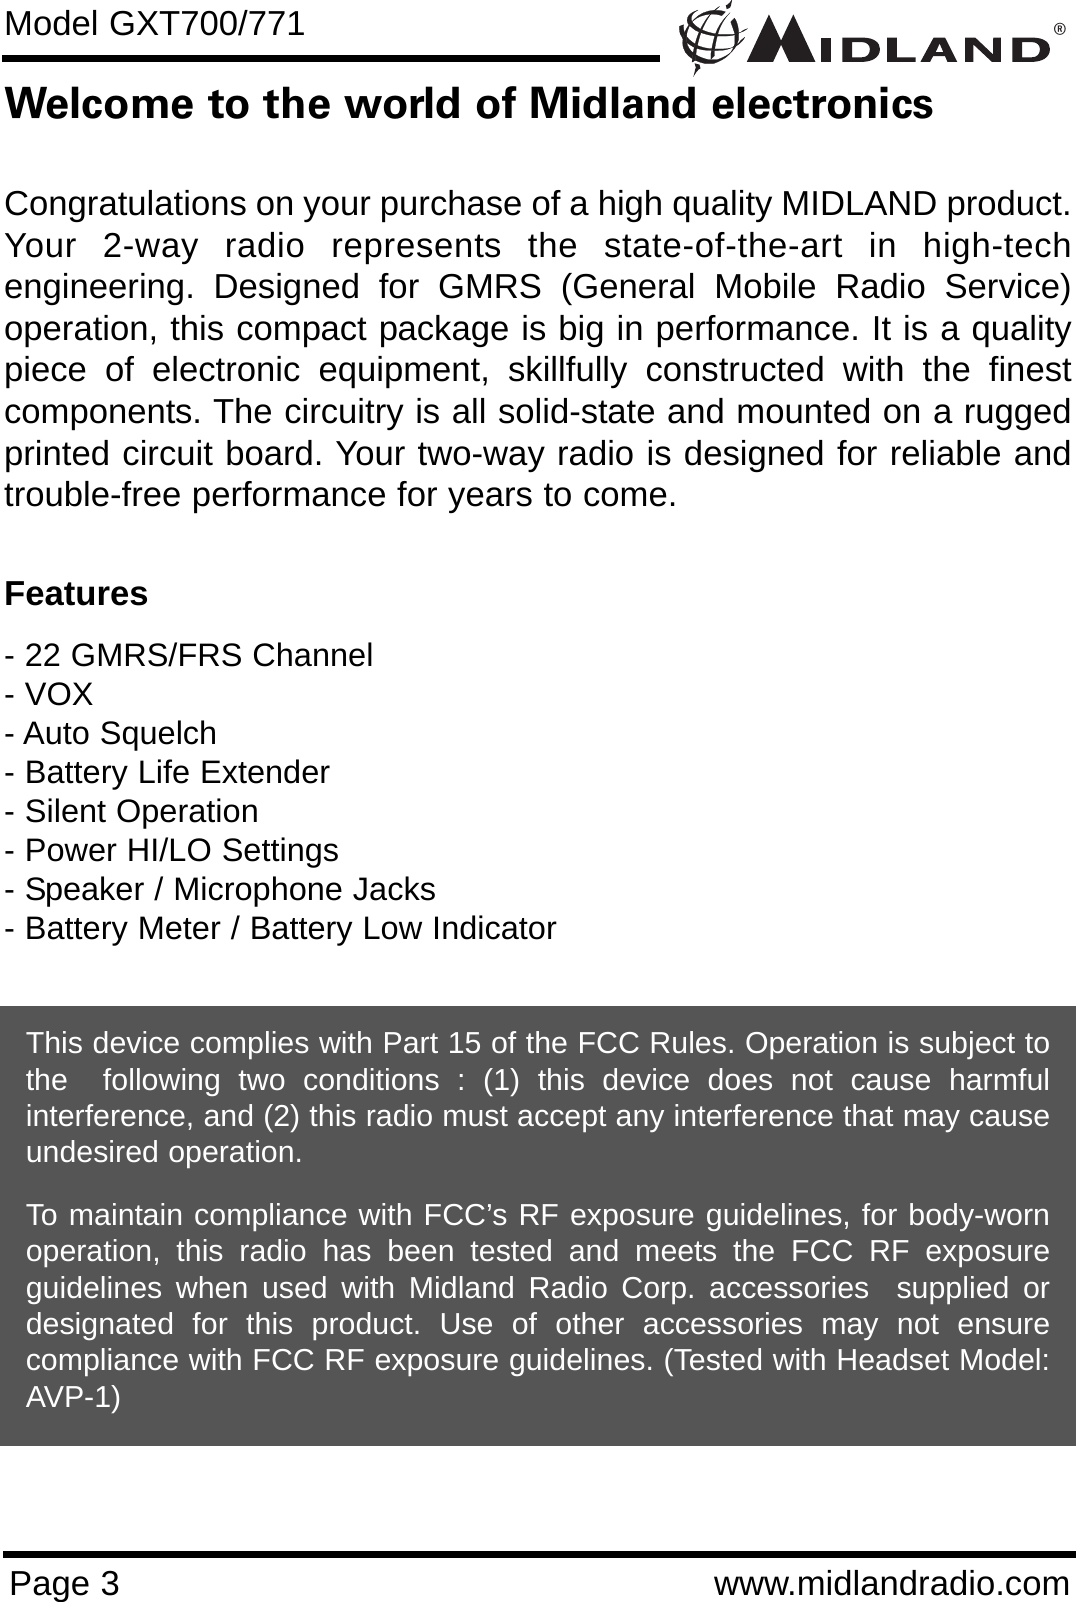 ®Page 3 www.midlandradio.comWelcome to the world of Midland electronicsCongratulations on your purchase of a high quality MIDLAND product.Your 2-way radio represents the state-of-the-art in high-techengineering. Designed for GMRS (General Mobile Radio Service)operation, this compact package is big in performance. It is a qualitypiece of electronic equipment, skillfully constructed with the finestcomponents. The circuitry is all solid-state and mounted on a ruggedprinted circuit board. Your two-way radio is designed for reliable andtrouble-free performance for years to come.Features- 22 GMRS/FRS Channel - VOX- Auto Squelch- Battery Life Extender- Silent Operation- Power HI/LO Settings- Speaker / Microphone Jacks- Battery Meter / Battery Low IndicatorThis device complies with Part 15 of the FCC Rules. Operation is subject tothe  following two conditions : (1) this device does not cause harmfulinterference, and (2) this radio must accept any interference that may causeundesired operation.To maintain compliance with FCC’s RF exposure guidelines, for body-wornoperation, this radio has been tested and meets the FCC RF exposureguidelines when used with Midland Radio Corp. accessories  supplied ordesignated for this product. Use of other accessories may not ensurecompliance with FCC RF exposure guidelines. (Tested with Headset Model:AVP-1)Model GXT700/771